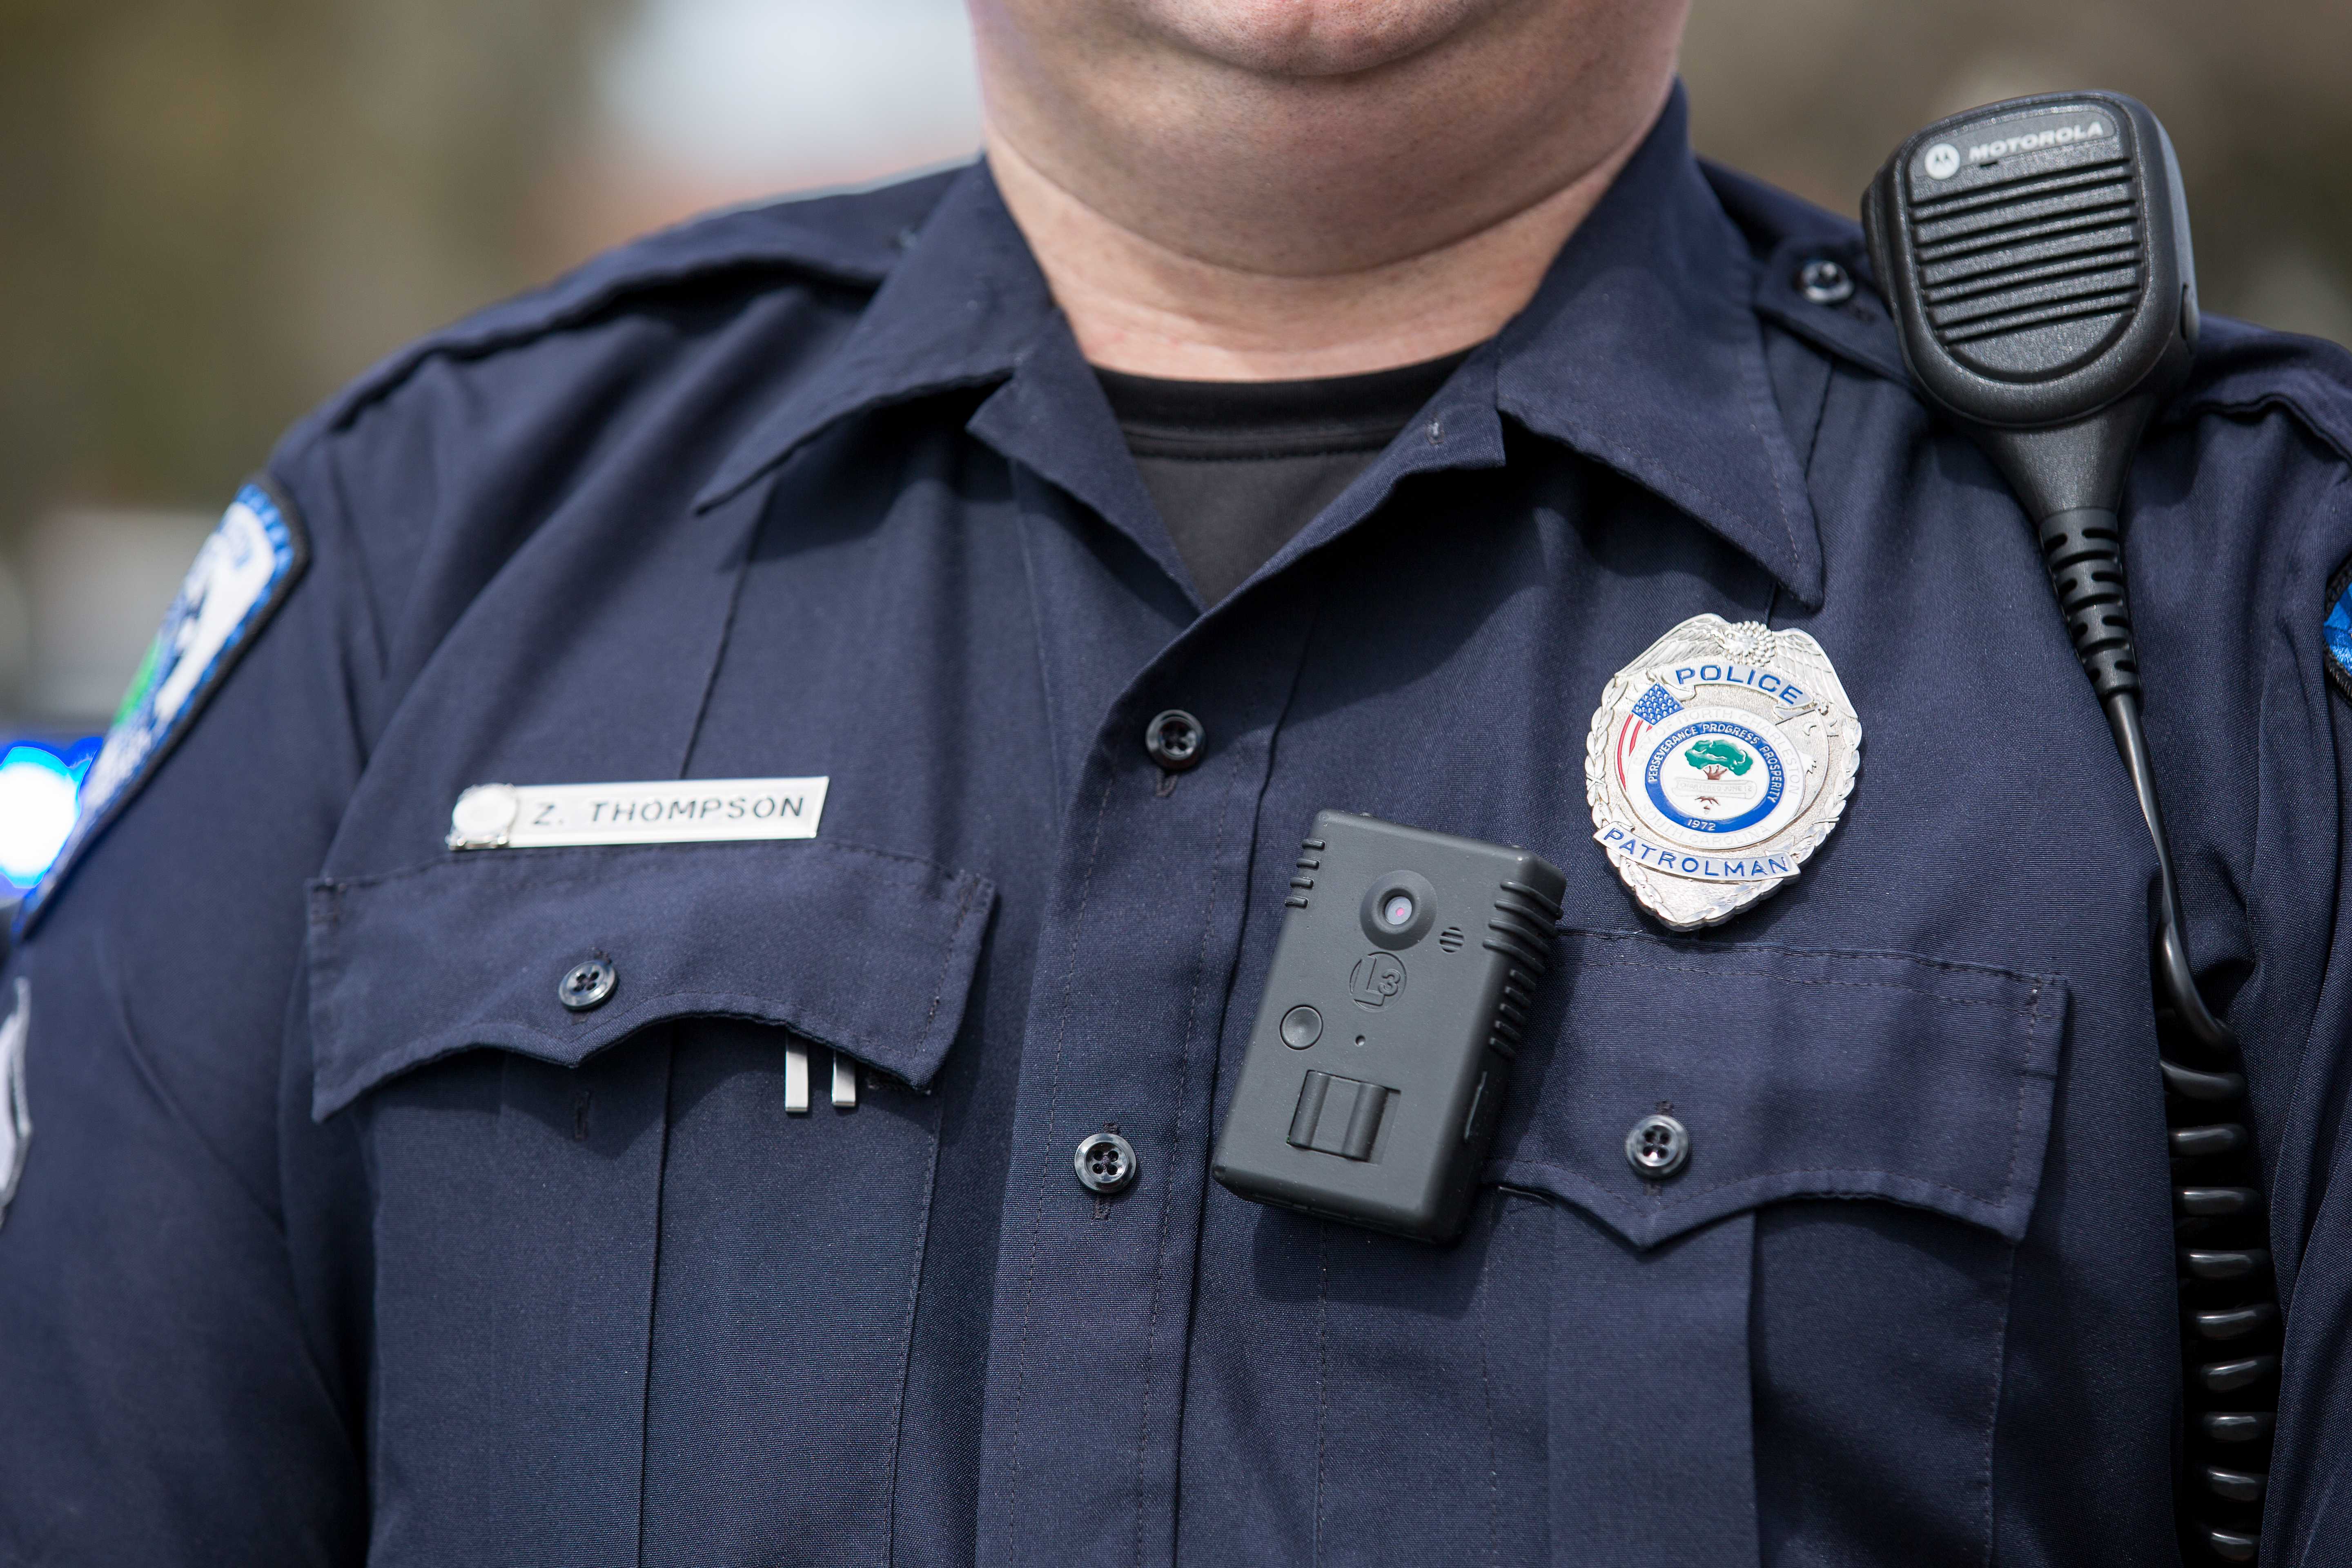 A police officer, seen with a body camera on his uniform · Photo reprinted with permission from Ryan Johnson